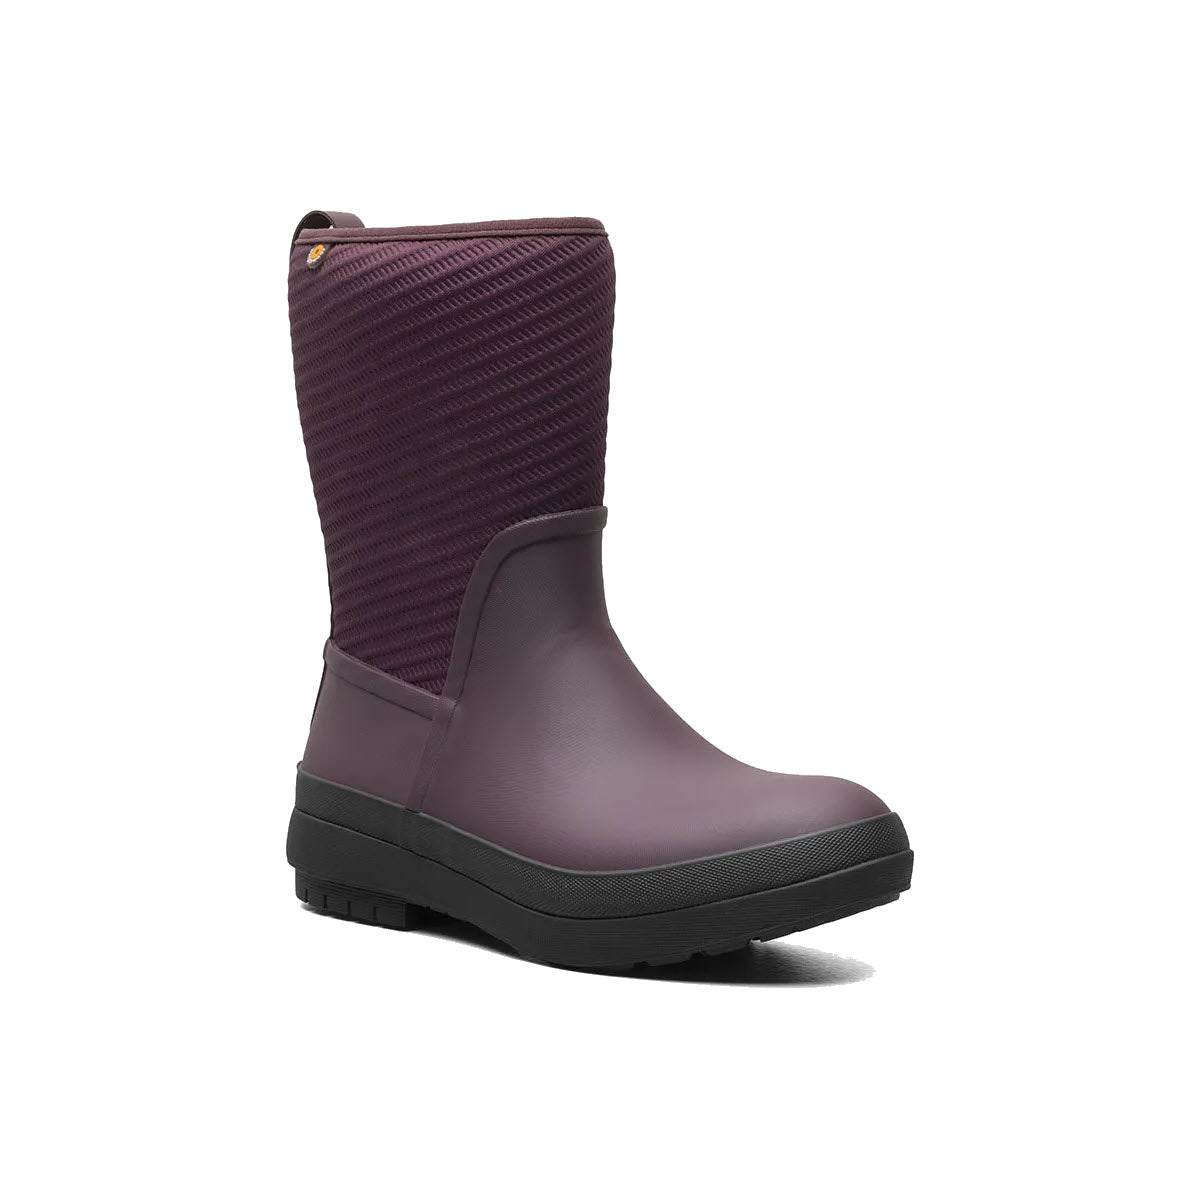 A single purple mid-calf Bogs Crandall II Mid Zip Wine snow boot with textured fabric upper and a smooth lower section, set against a white background.